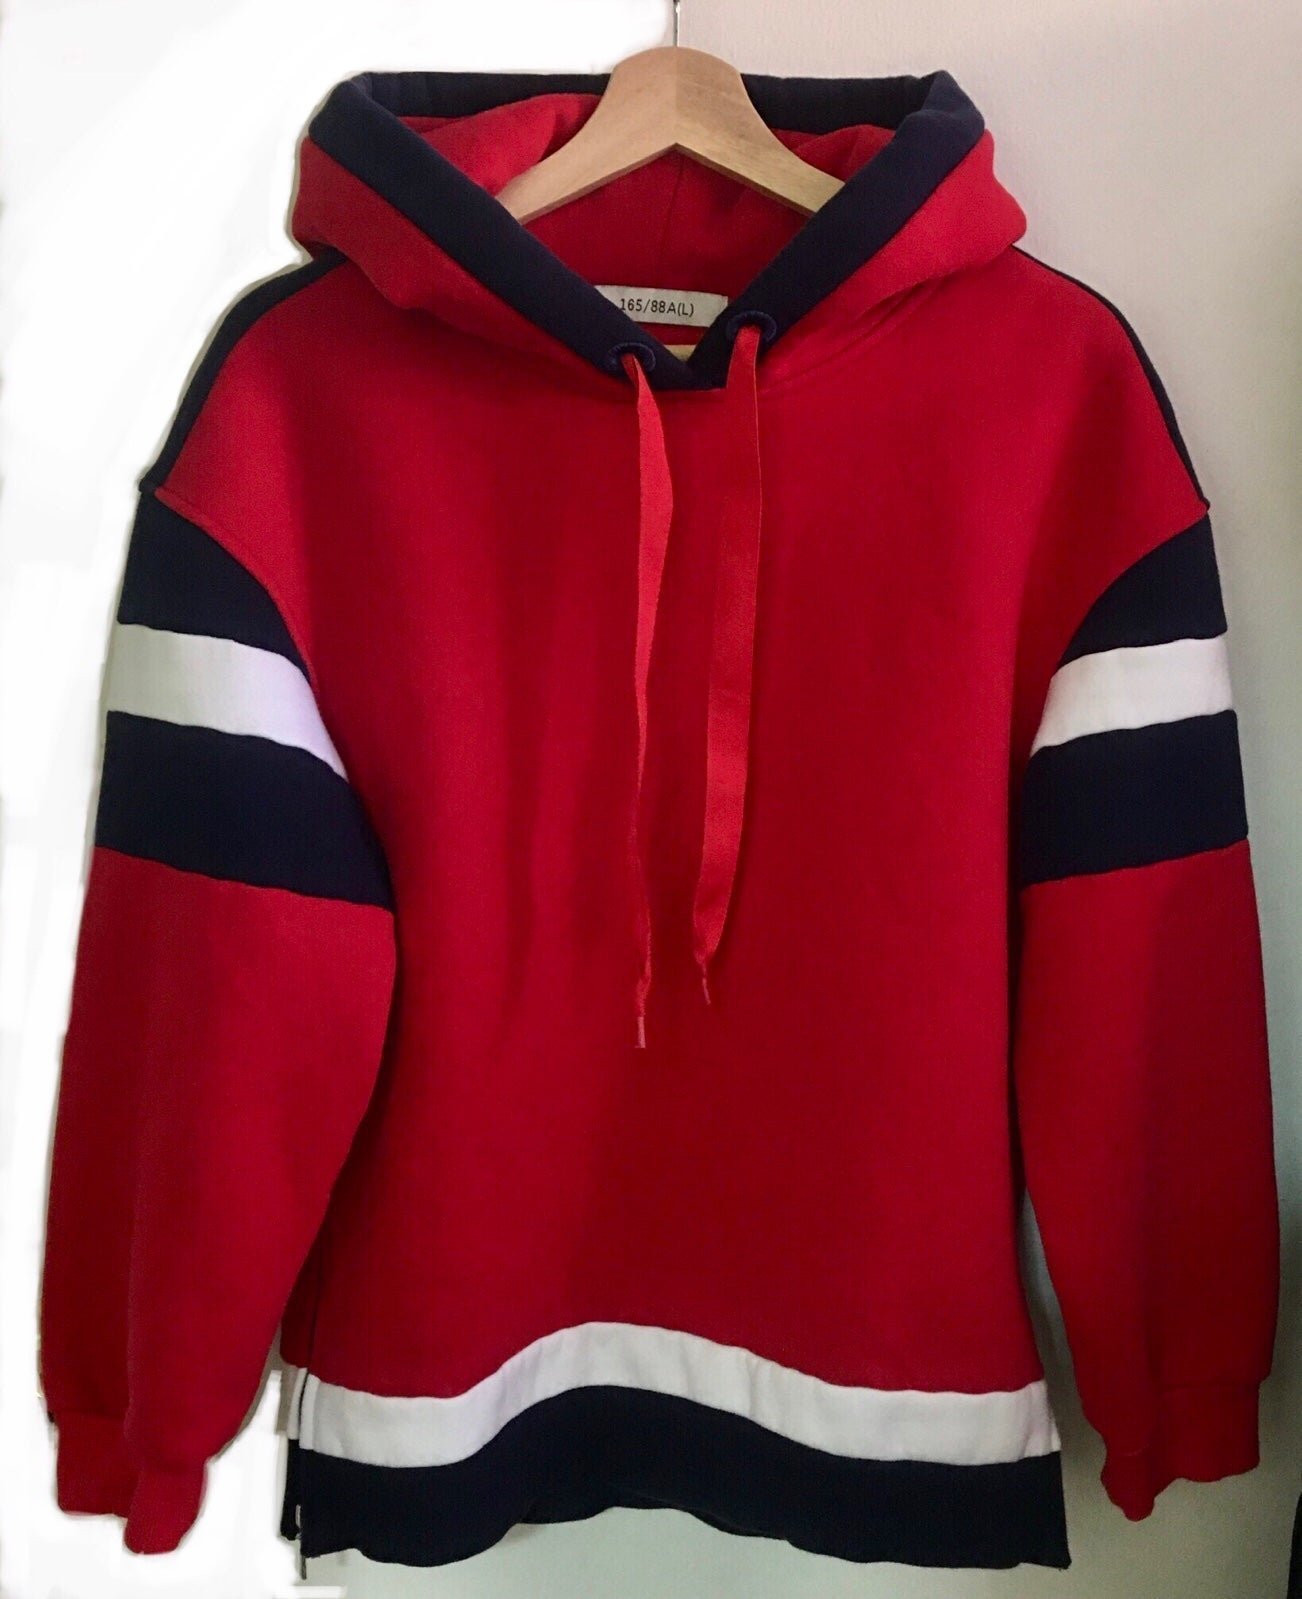 reasonable price Cute red hoodie good for Holidays ! o4